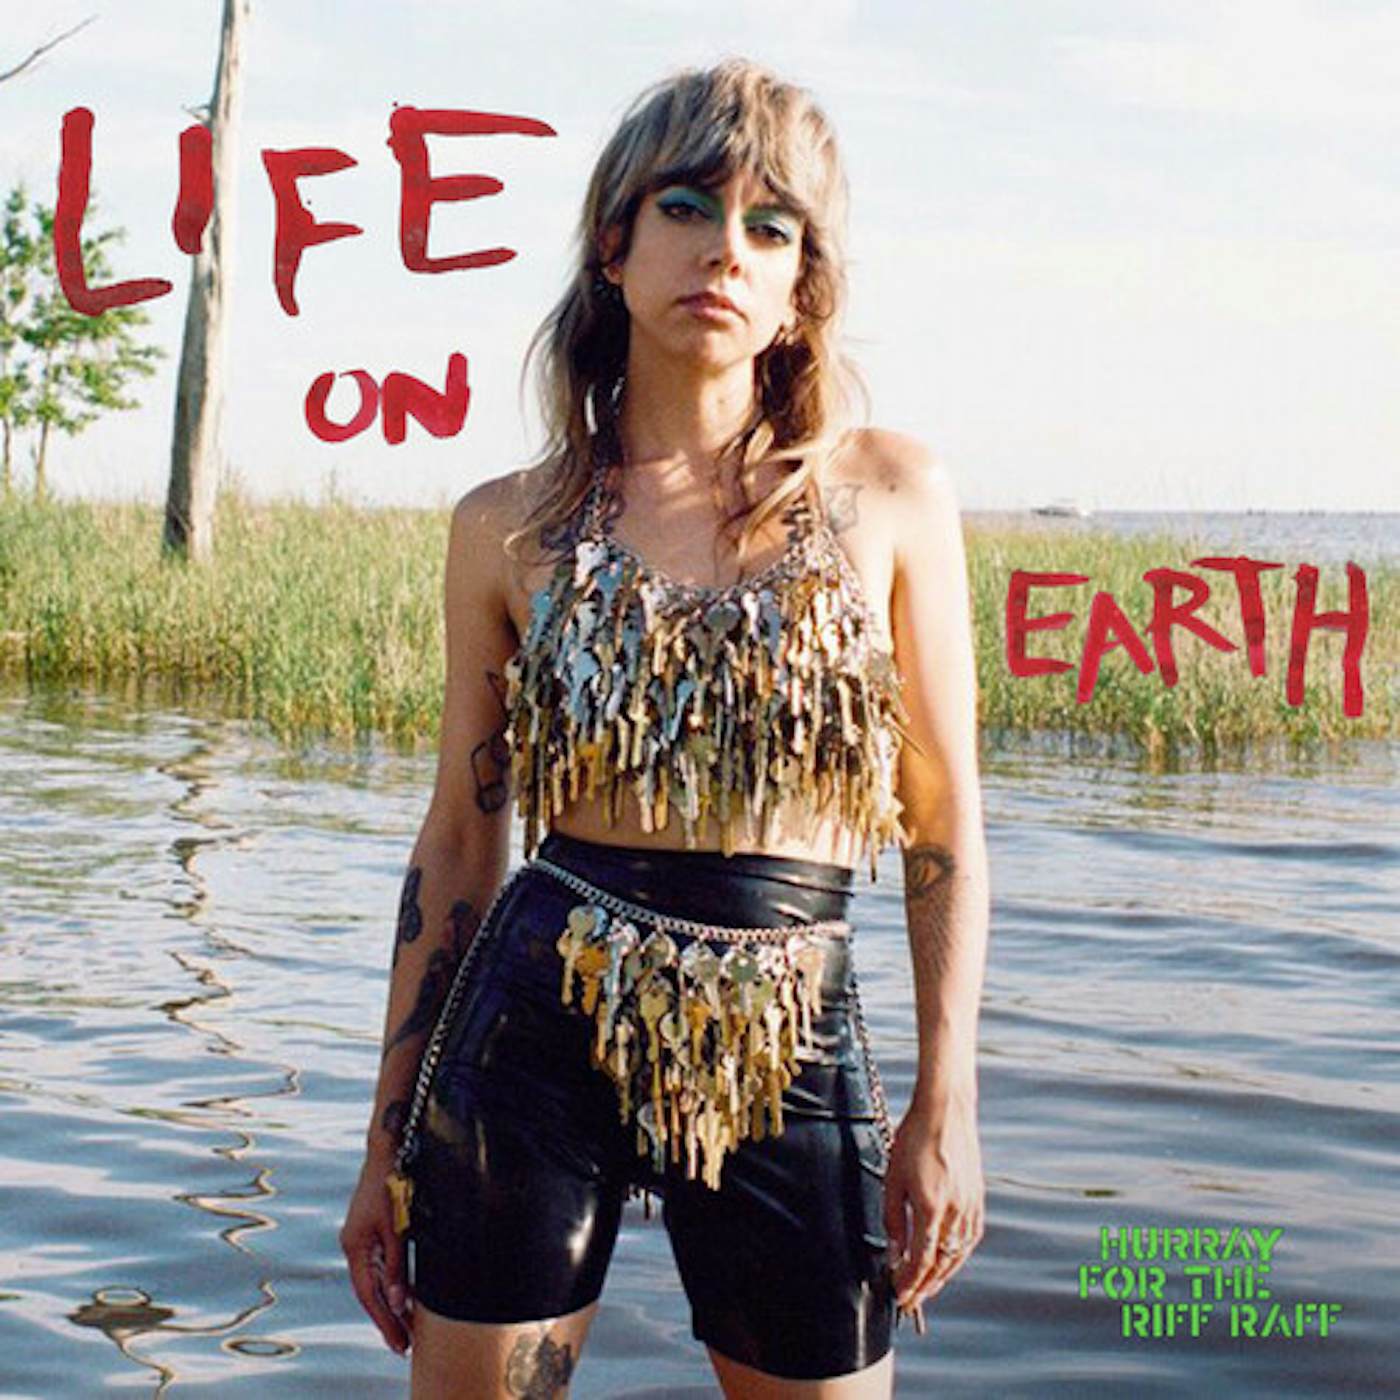 Hurray For The Riff Raff Life On Earth Vinyl Record